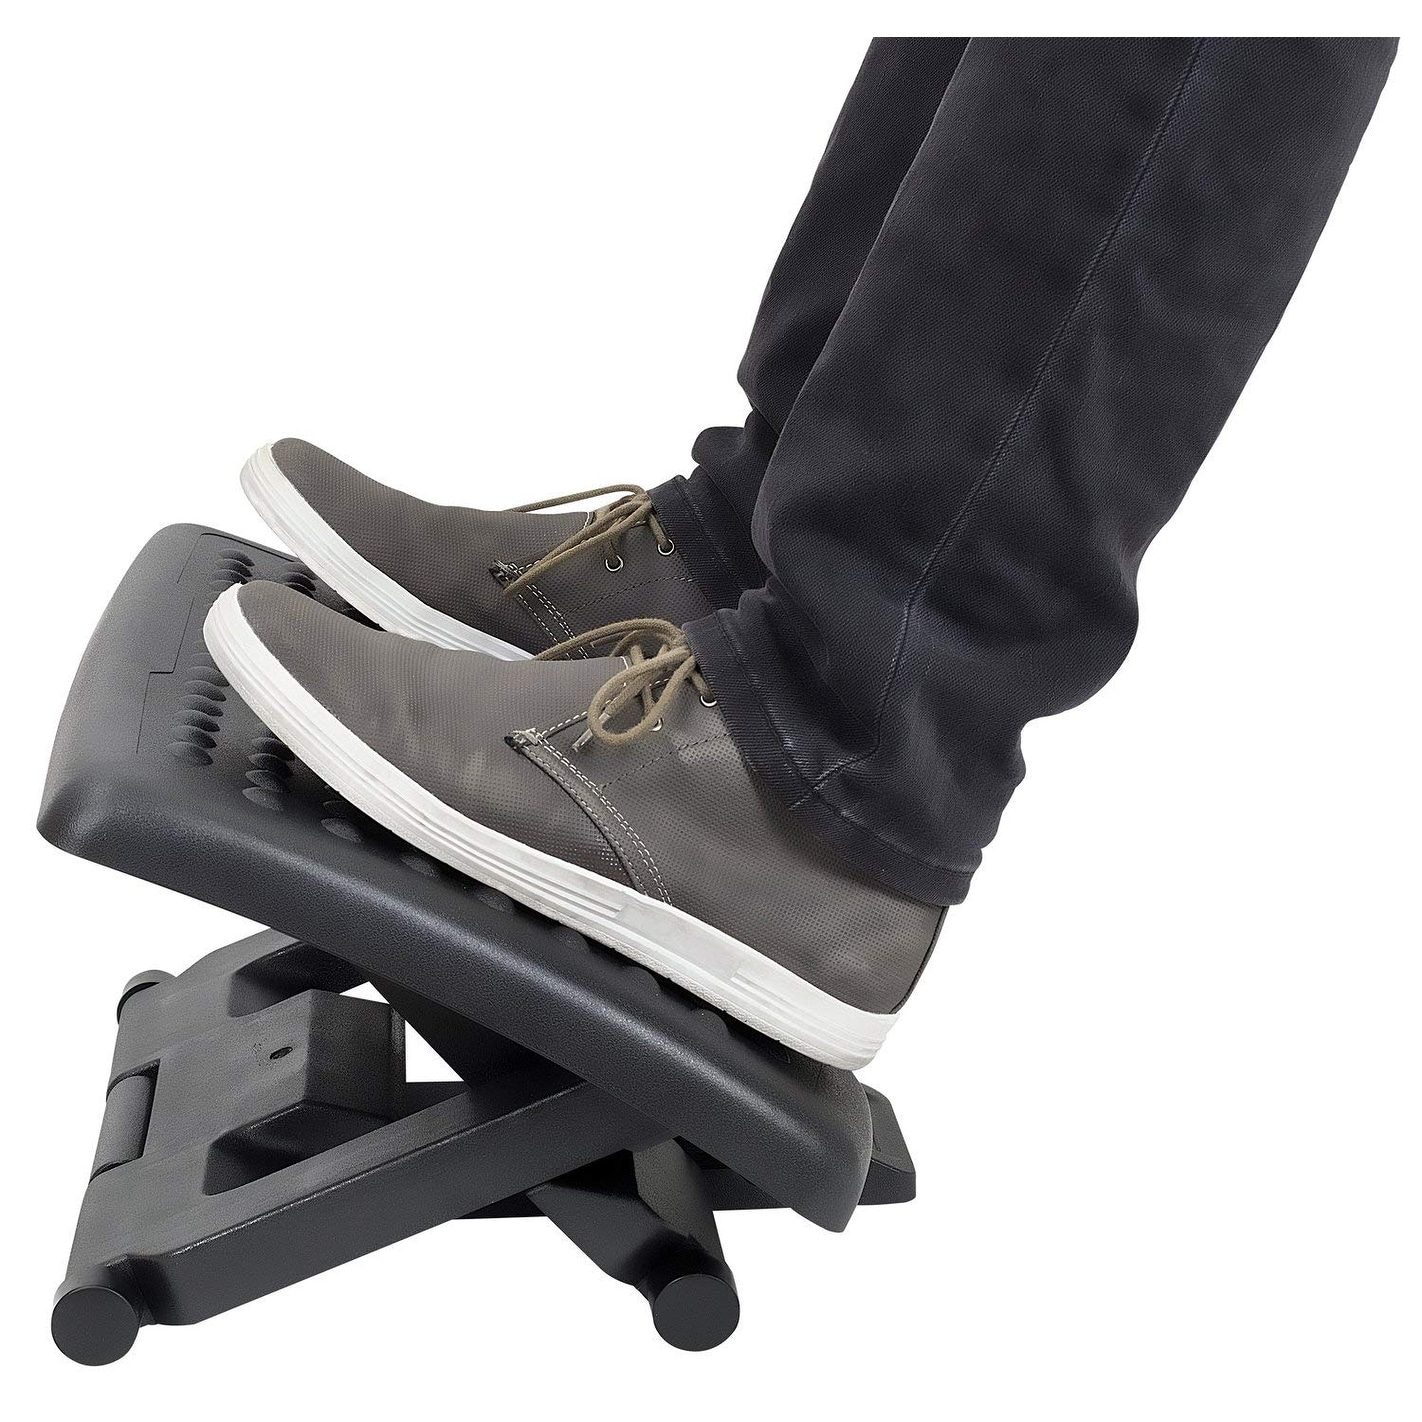 Under Desk Footrest, Adjustable Angle and Massaging Rollers, 18 x 13 Inches – MI-7808 - by Mount-It!